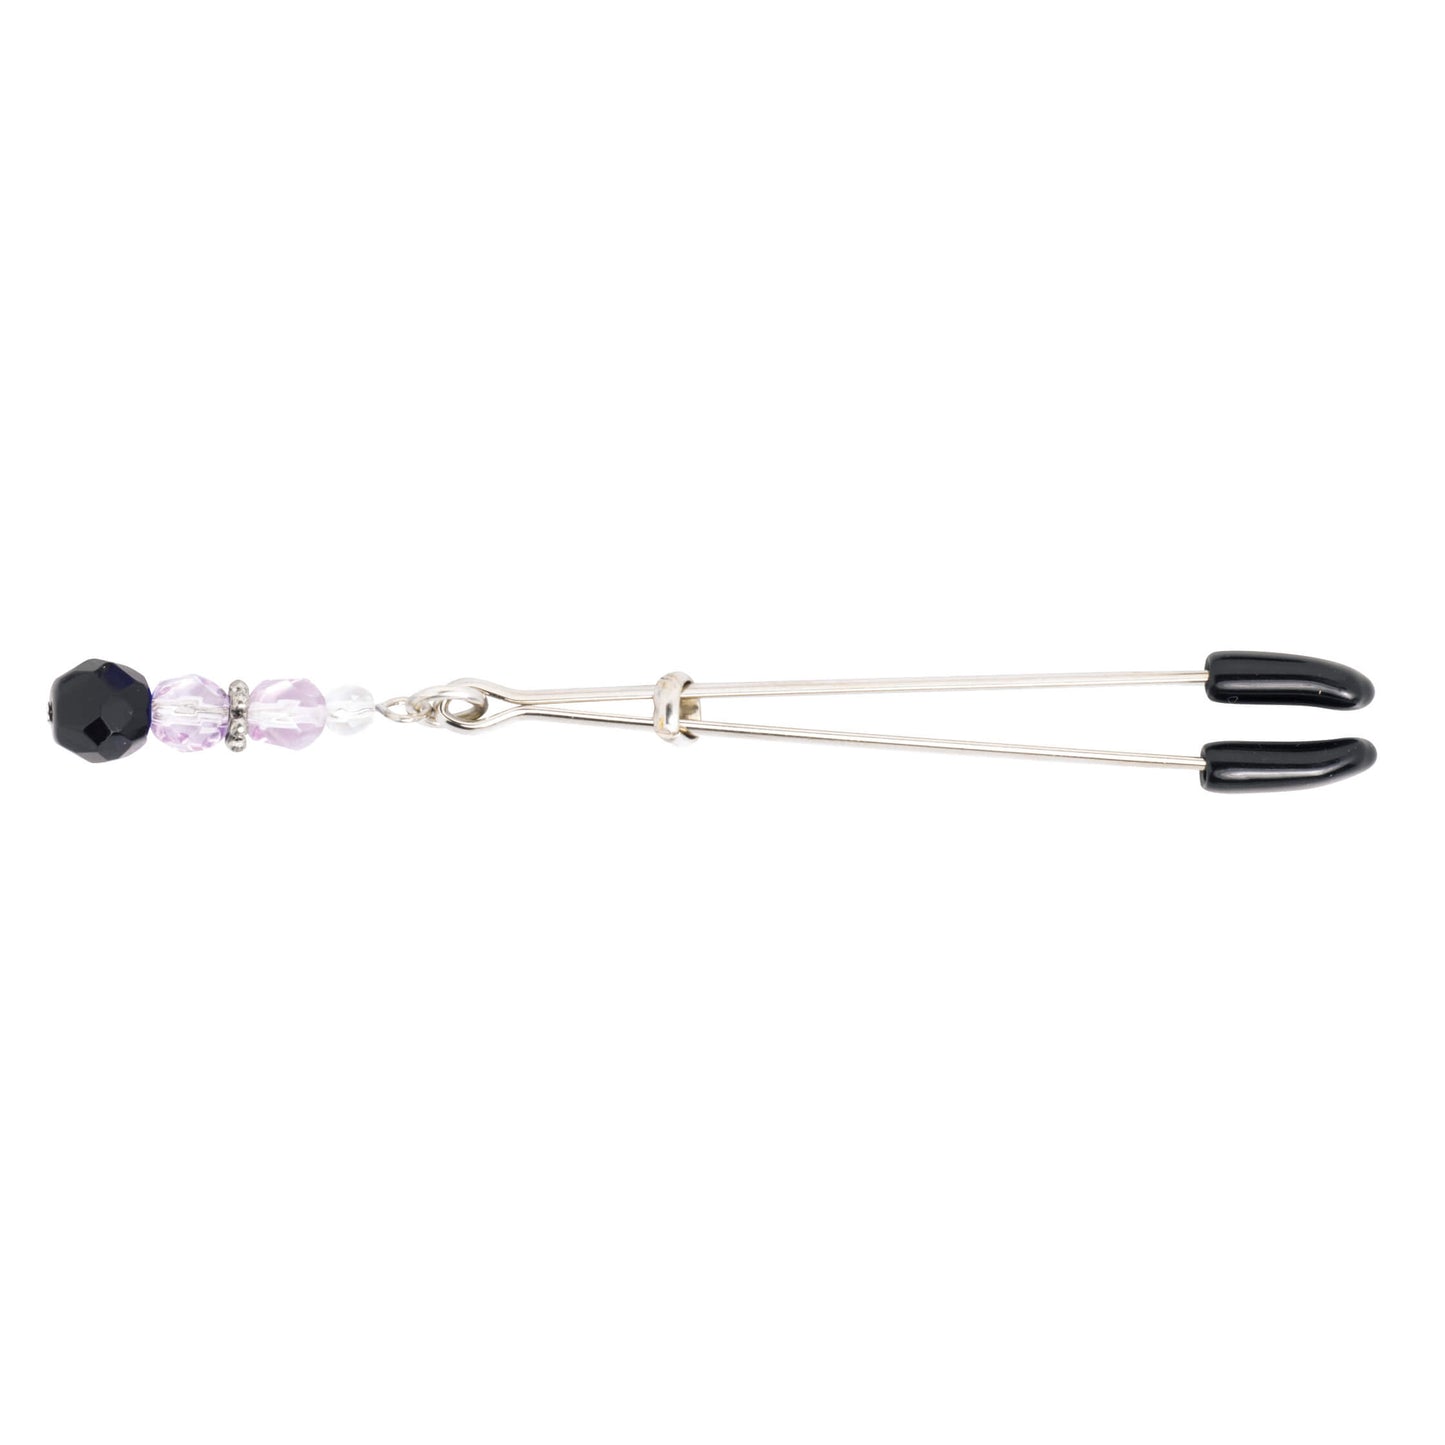 Beaded Clit Clamp BDSM Toy